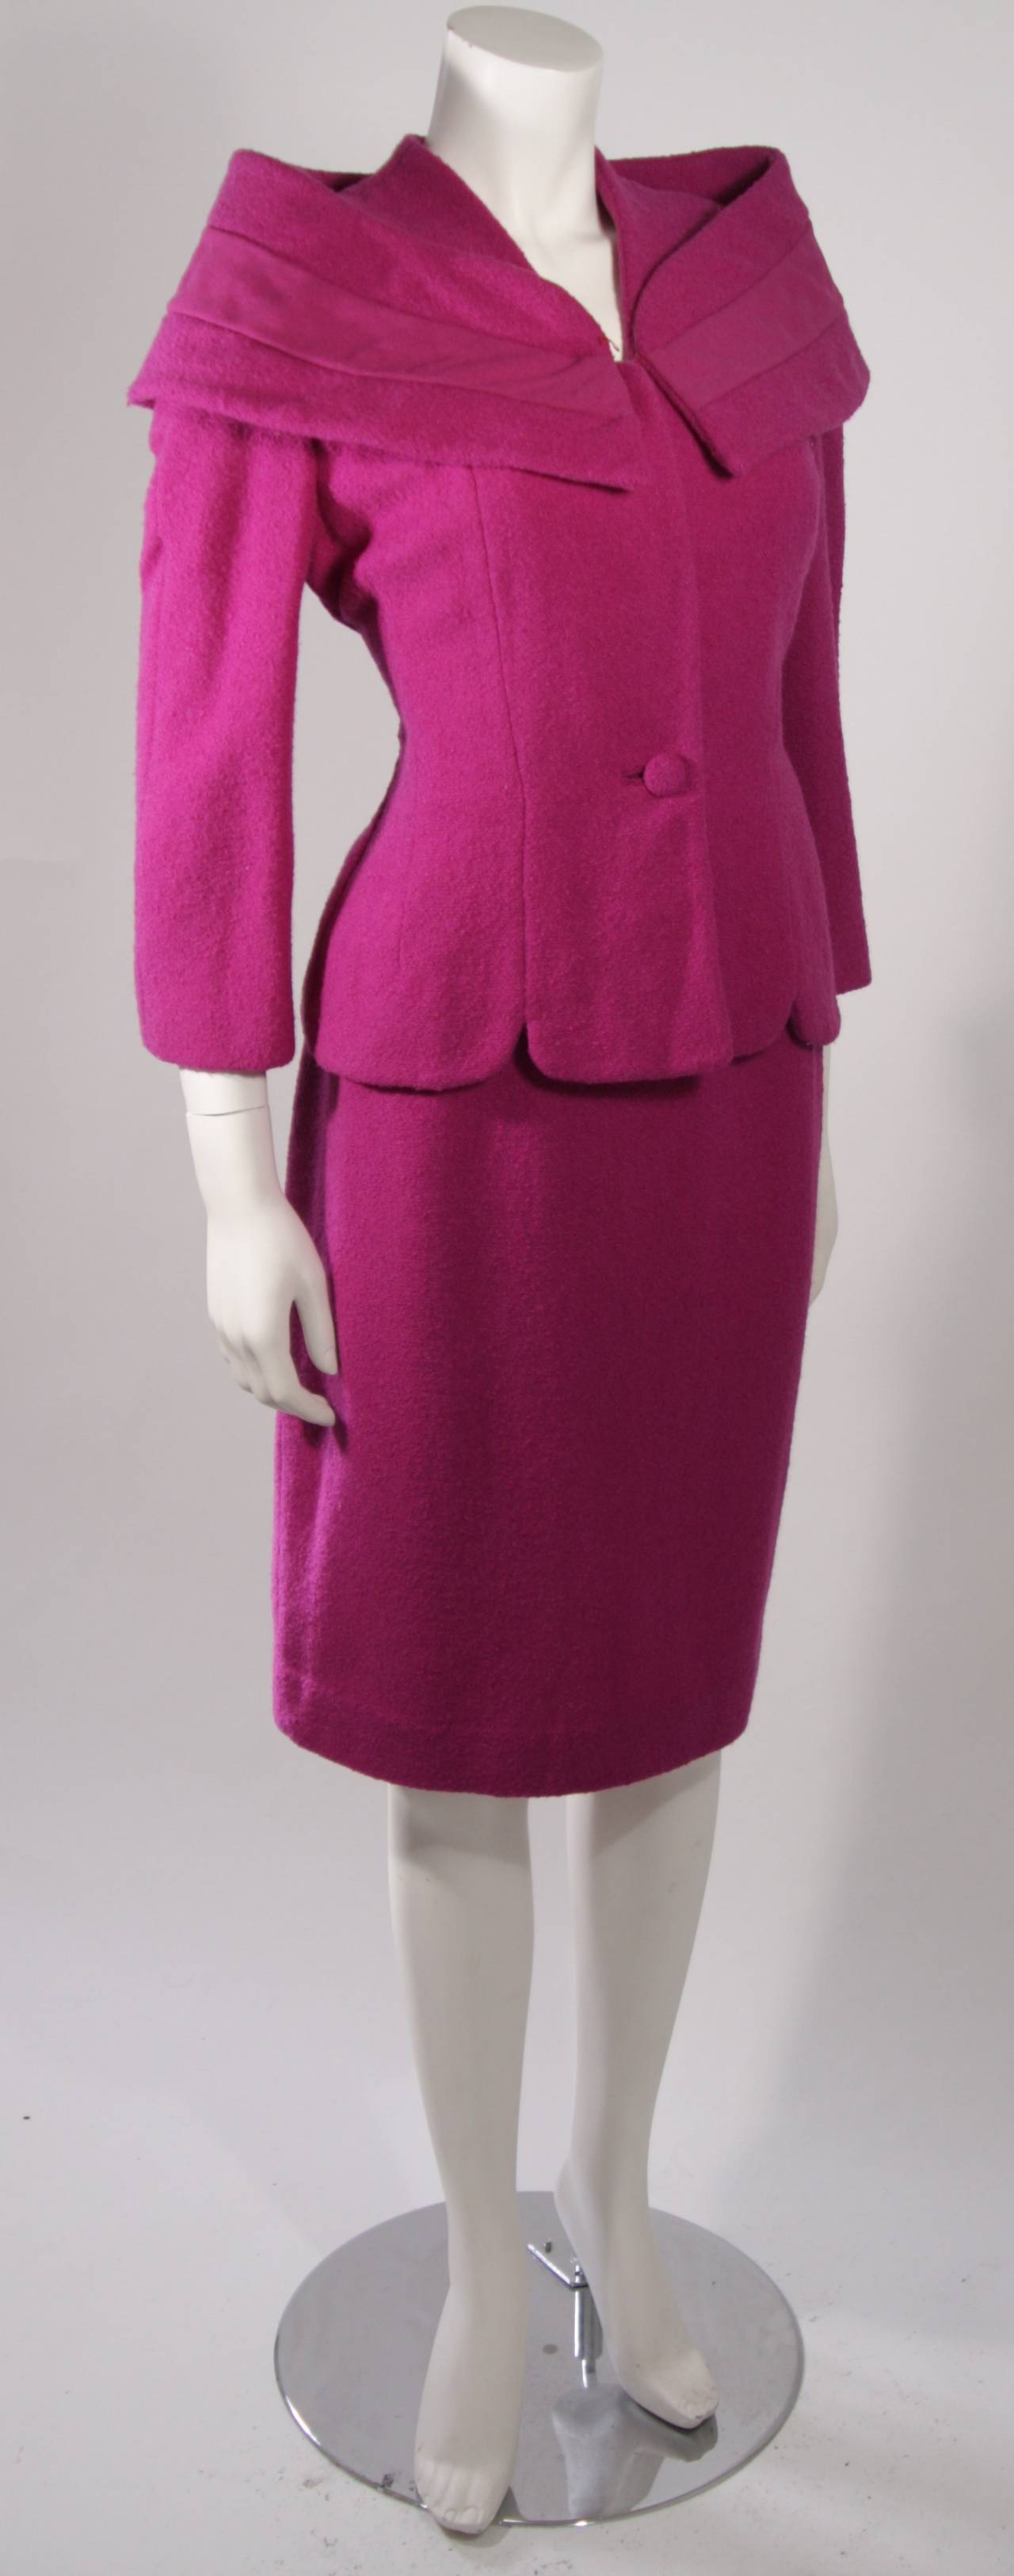 This is a Lilli Ann ensemble. The suit is composed of a purple wool. The jacket has center front closures and features a wrap style accent at the shoulders. The skirt is a fitted pencil silhouette and has a zipper closure. 

Measures